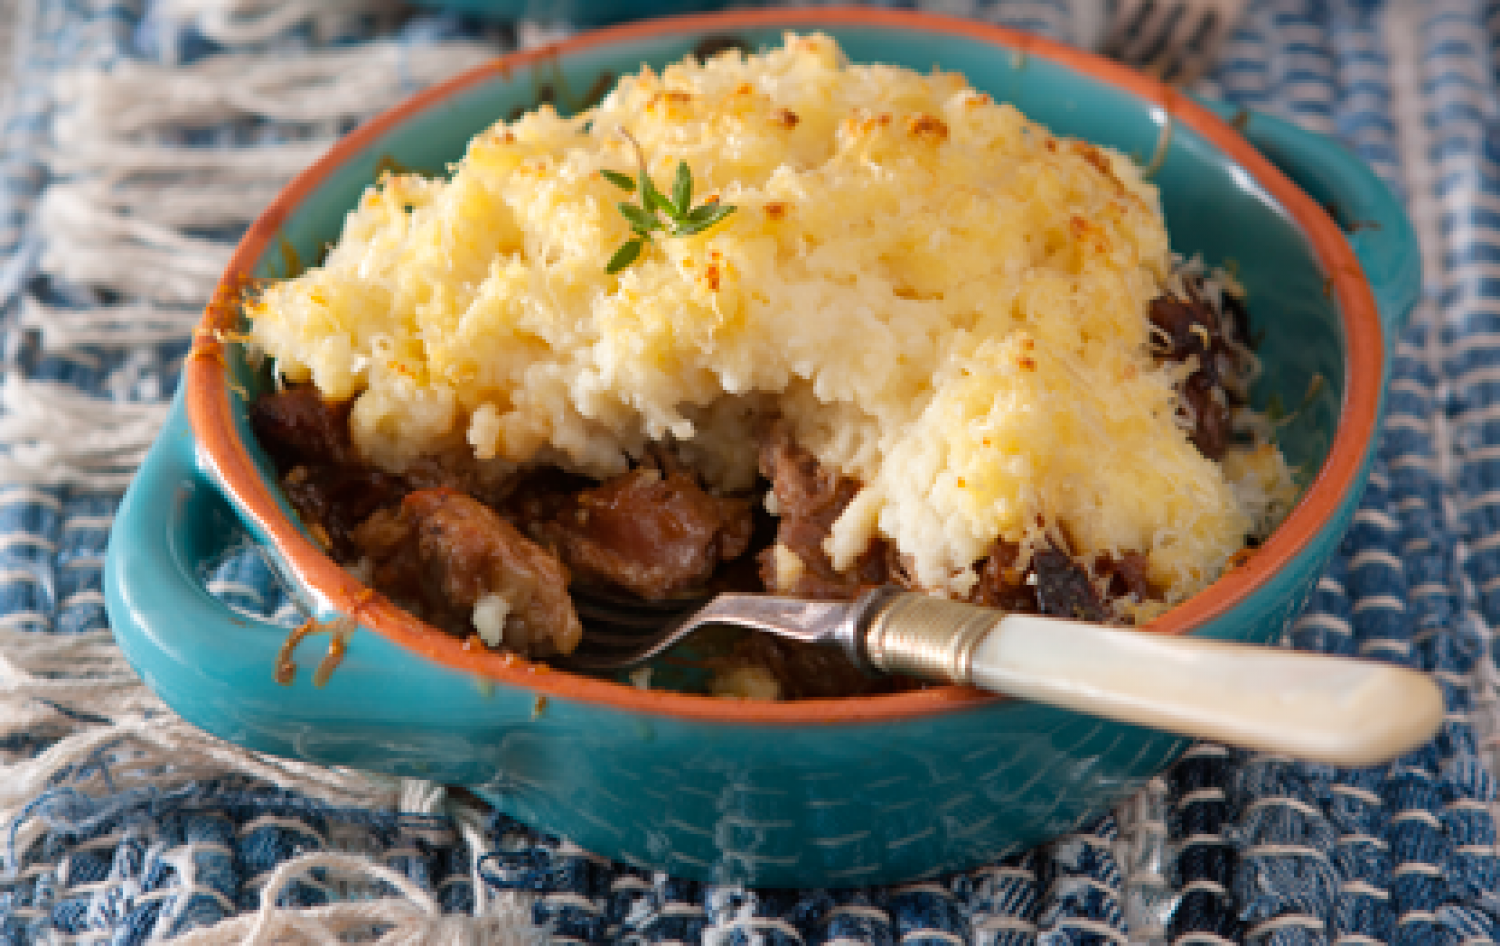 Steak and Kidney pie with creamy parmesan CousCous topping ...